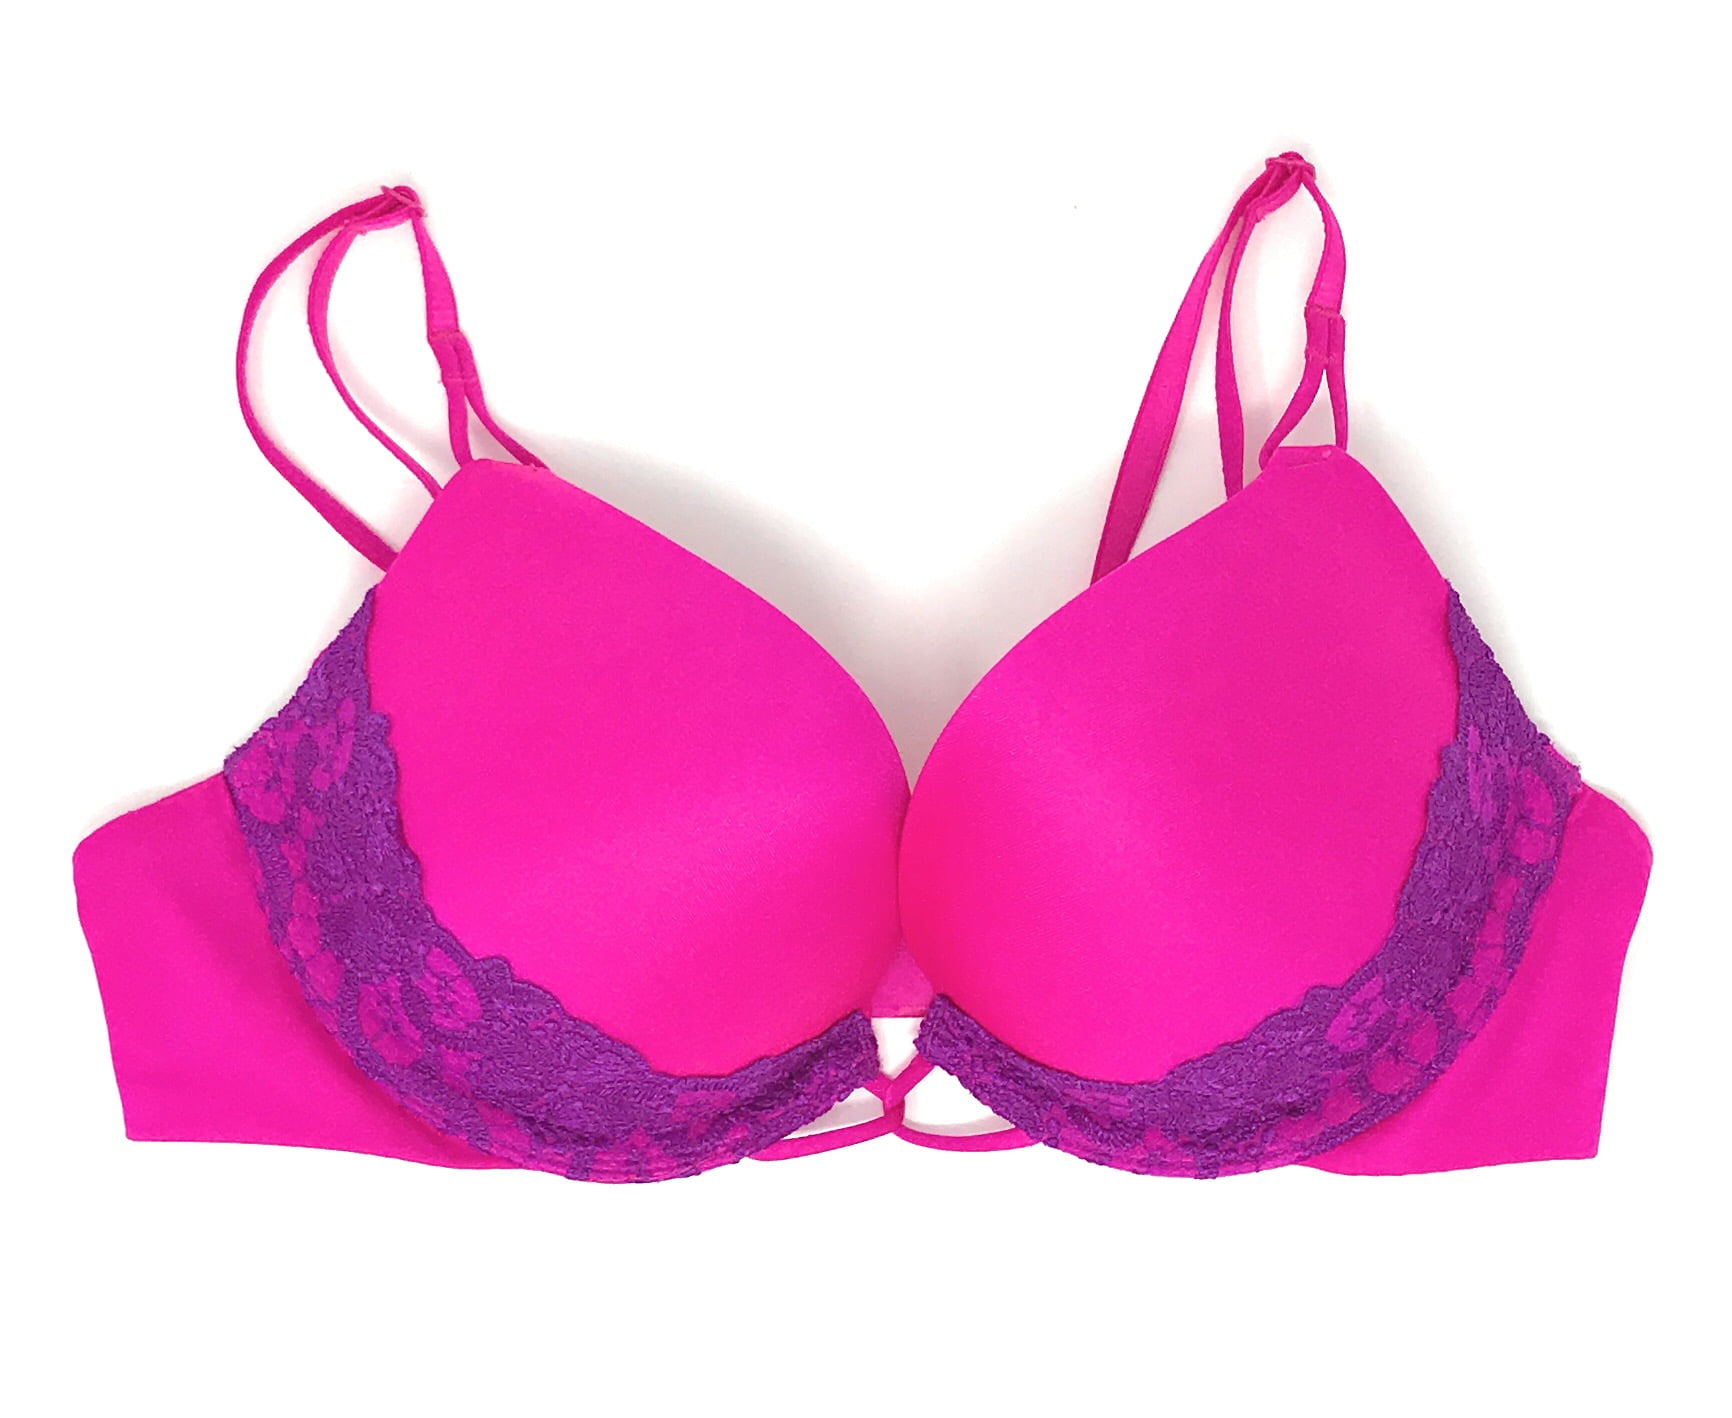 Victoria's Secret Purest Pink Lace Shine Strap Add 2 Cups Push Up Bombshell  Bra